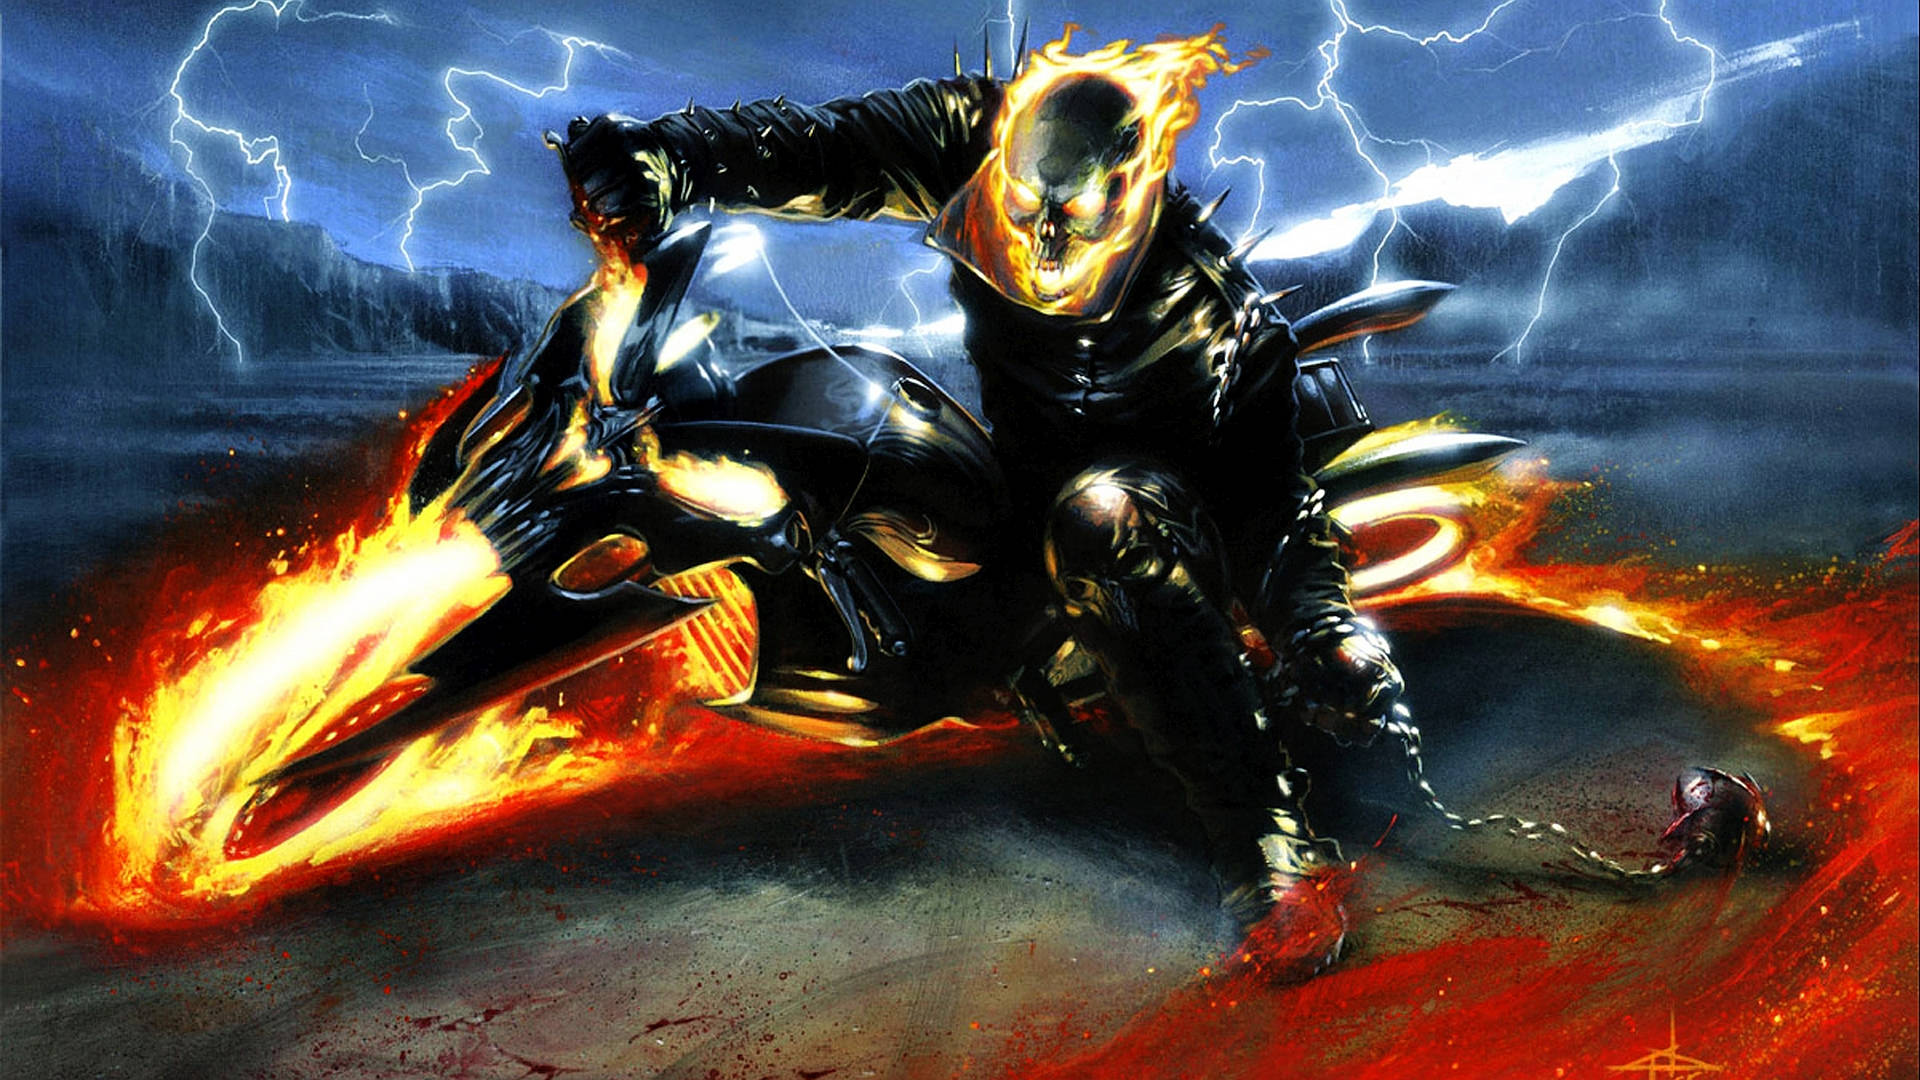 Easy Rider Motorbike With Flame Background